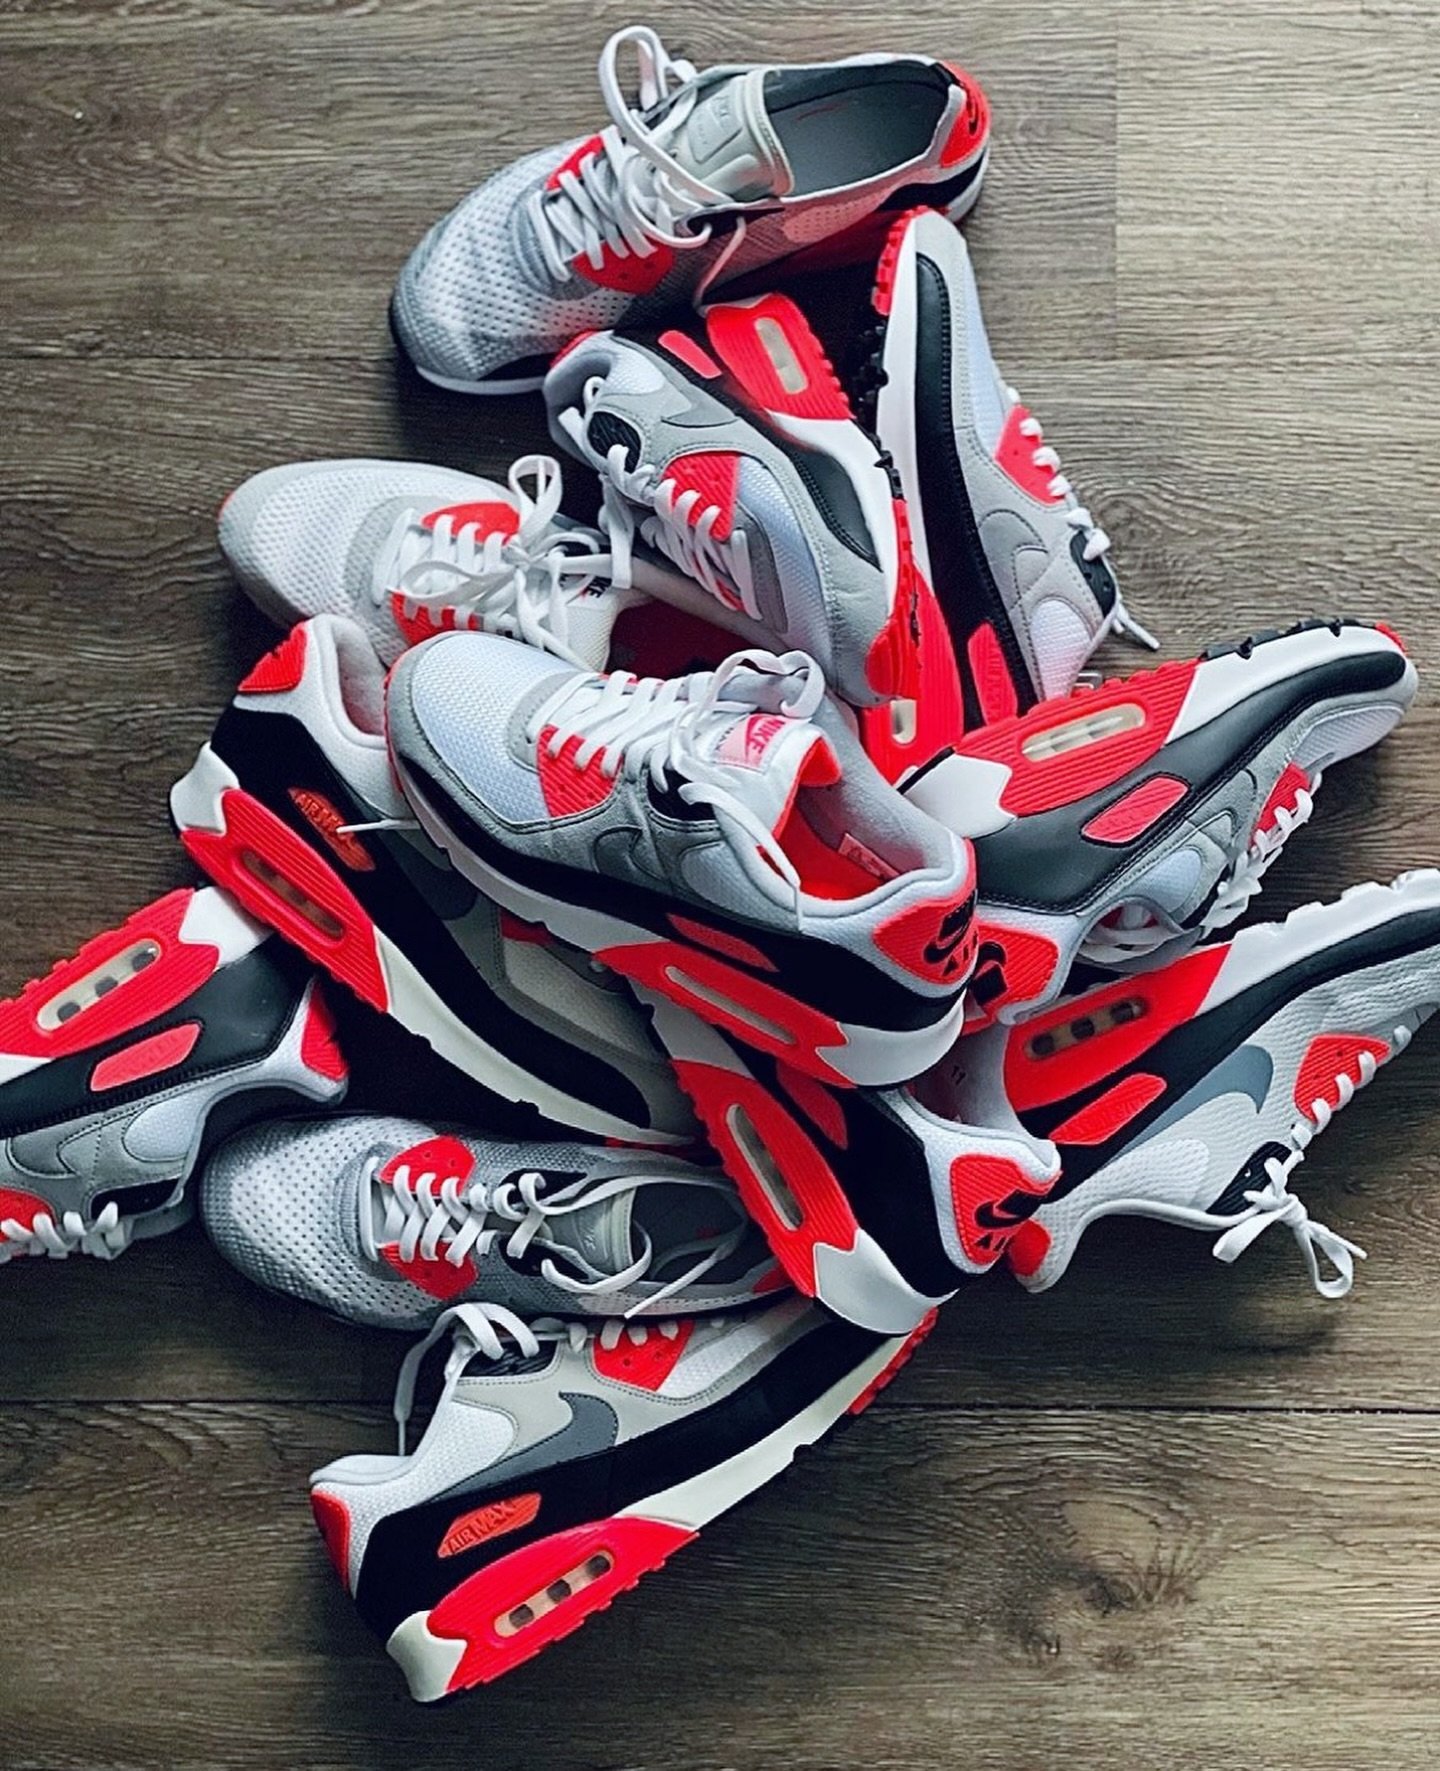 If having this many versions of the same shoe is wrong... I don&rsquo;t want to be right. Happy Air Max Day! #airmaxday 
-
I think it&rsquo;s safe to say that the Air Max 90 OG Infrared Colorway, is my favourite sneaker of all time! 🙌🐐